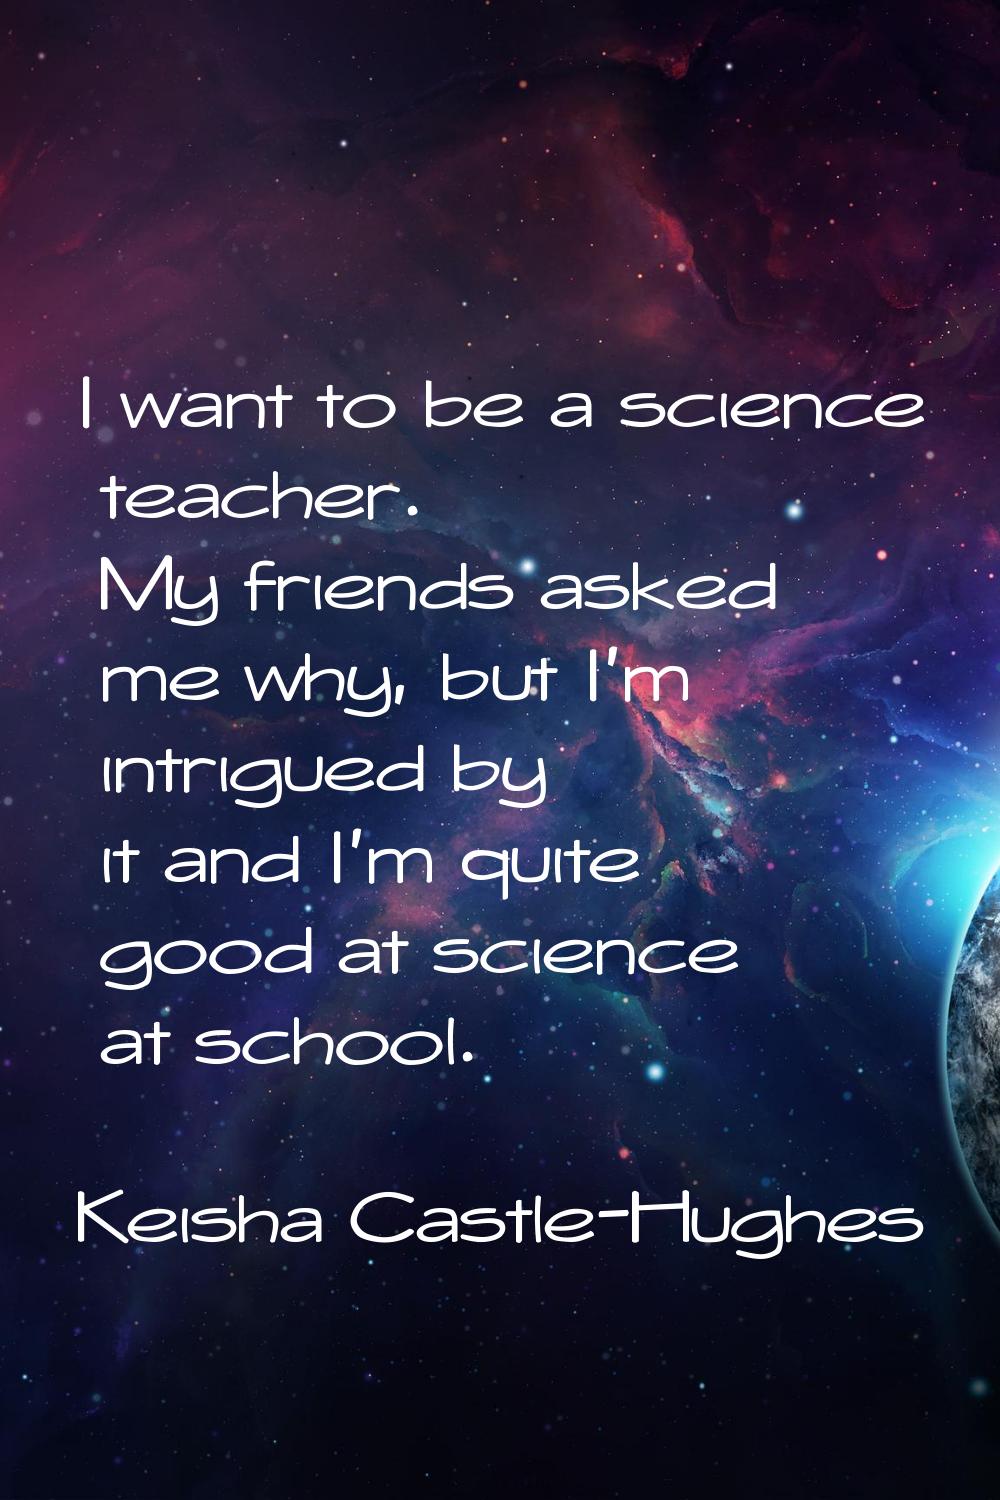 I want to be a science teacher. My friends asked me why, but I'm intrigued by it and I'm quite good